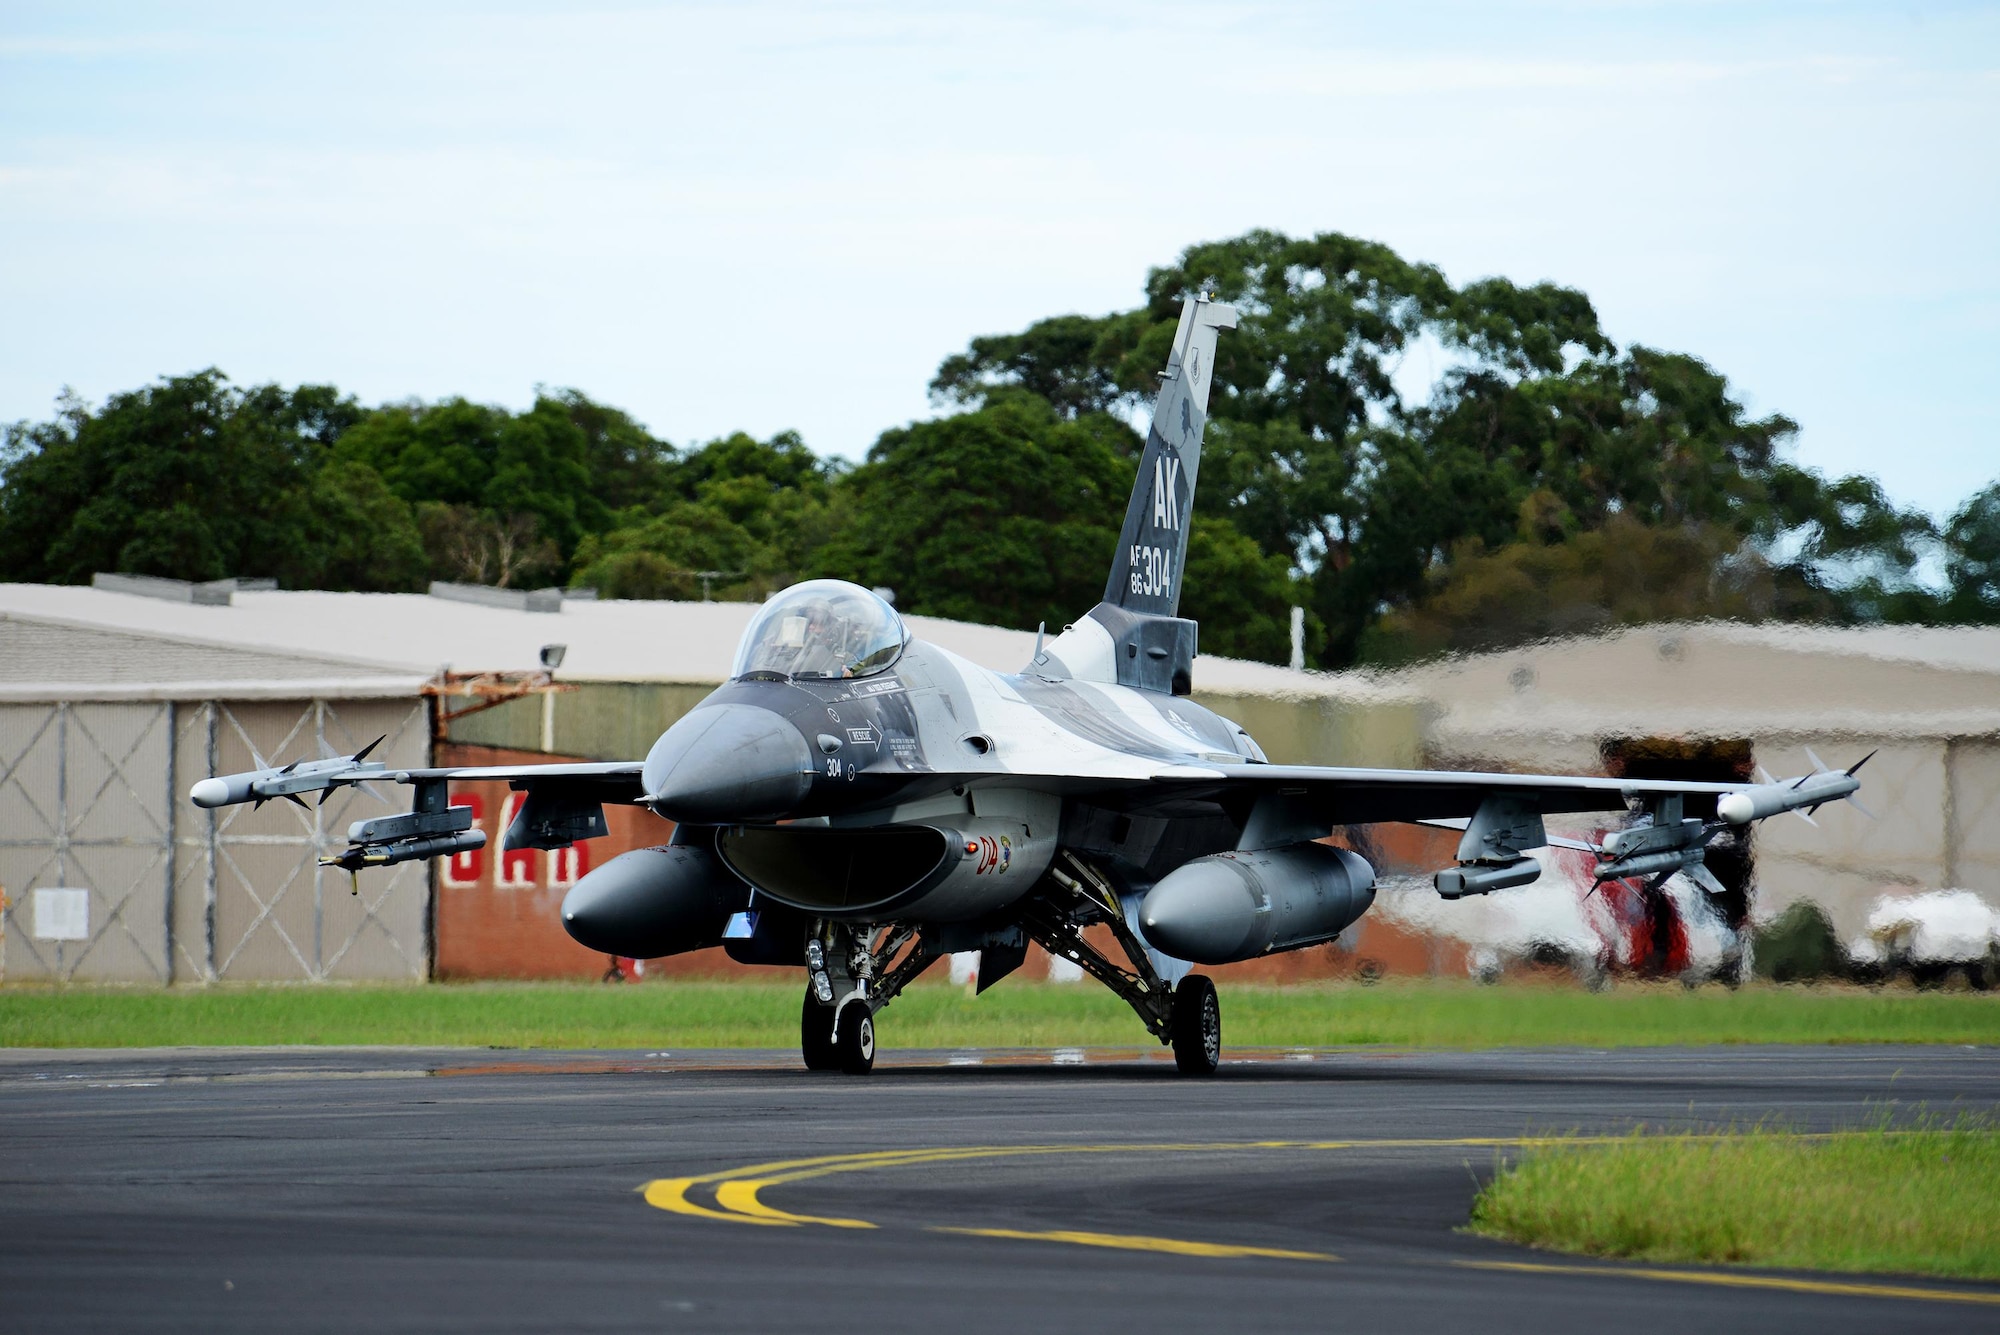 A U.S. Air Force F-16 Fighting Falcon taxis at Royal Australian Air Force Base Williamtown, during Exercise Diamond Shield 2017 in New South Wales, Australia, March 21, 2017. (U.S. Air Force photo by Tech. Sgt. Steven R. Doty)